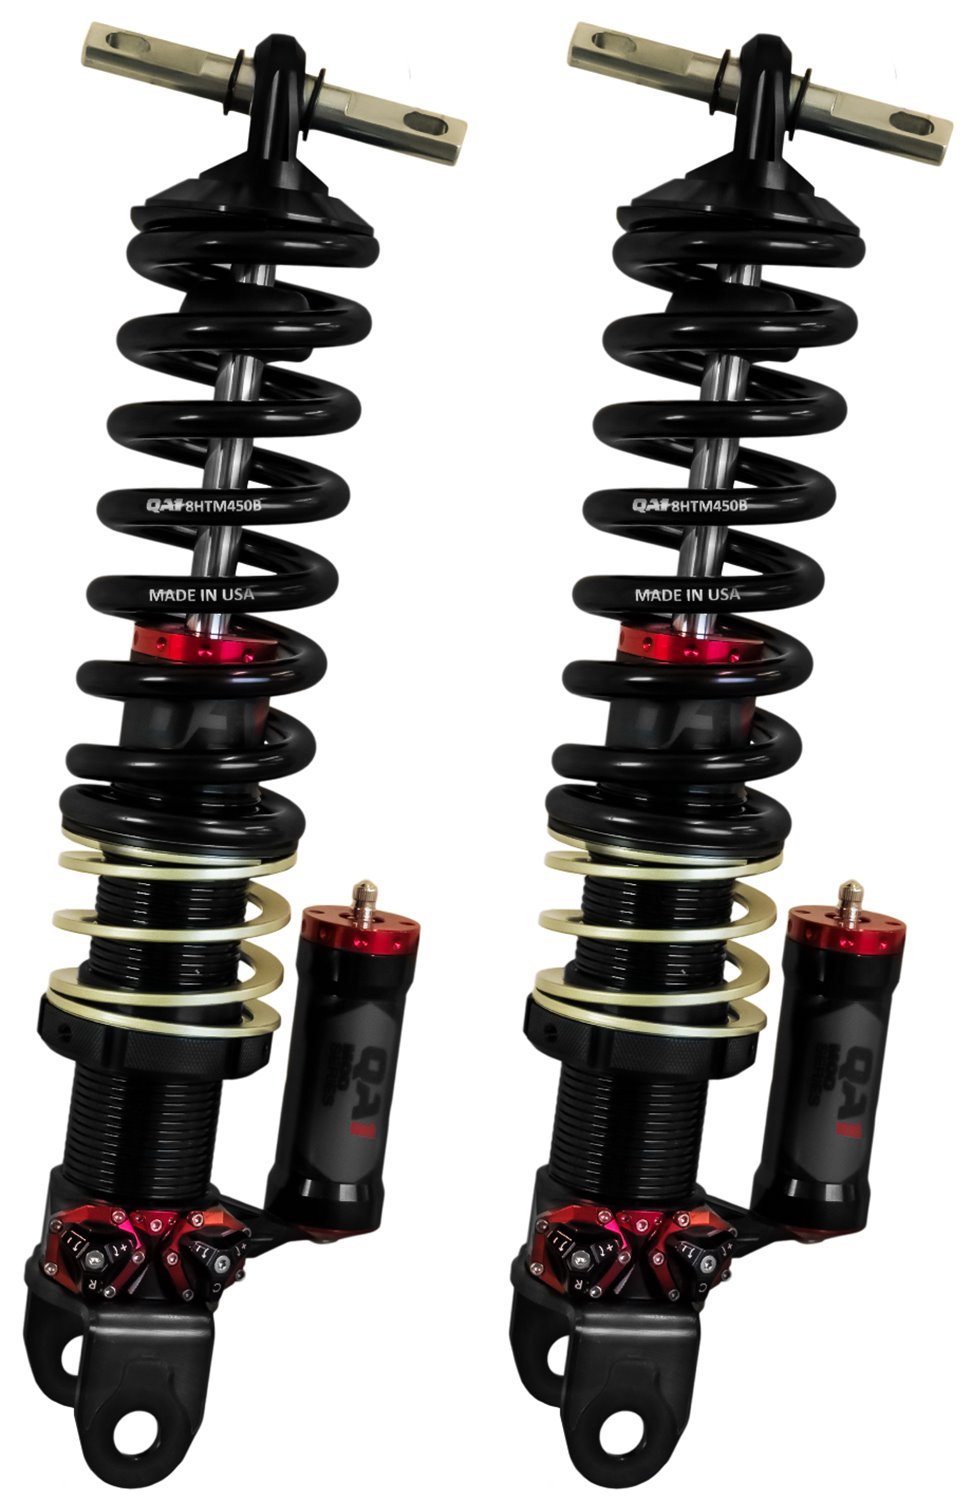 MOD-Series Rear Coil-Over System 1997-2013 Chevy Corvette C5/C6, 4-Way Adjustable [Spring Rate: 550 lbs./in.]